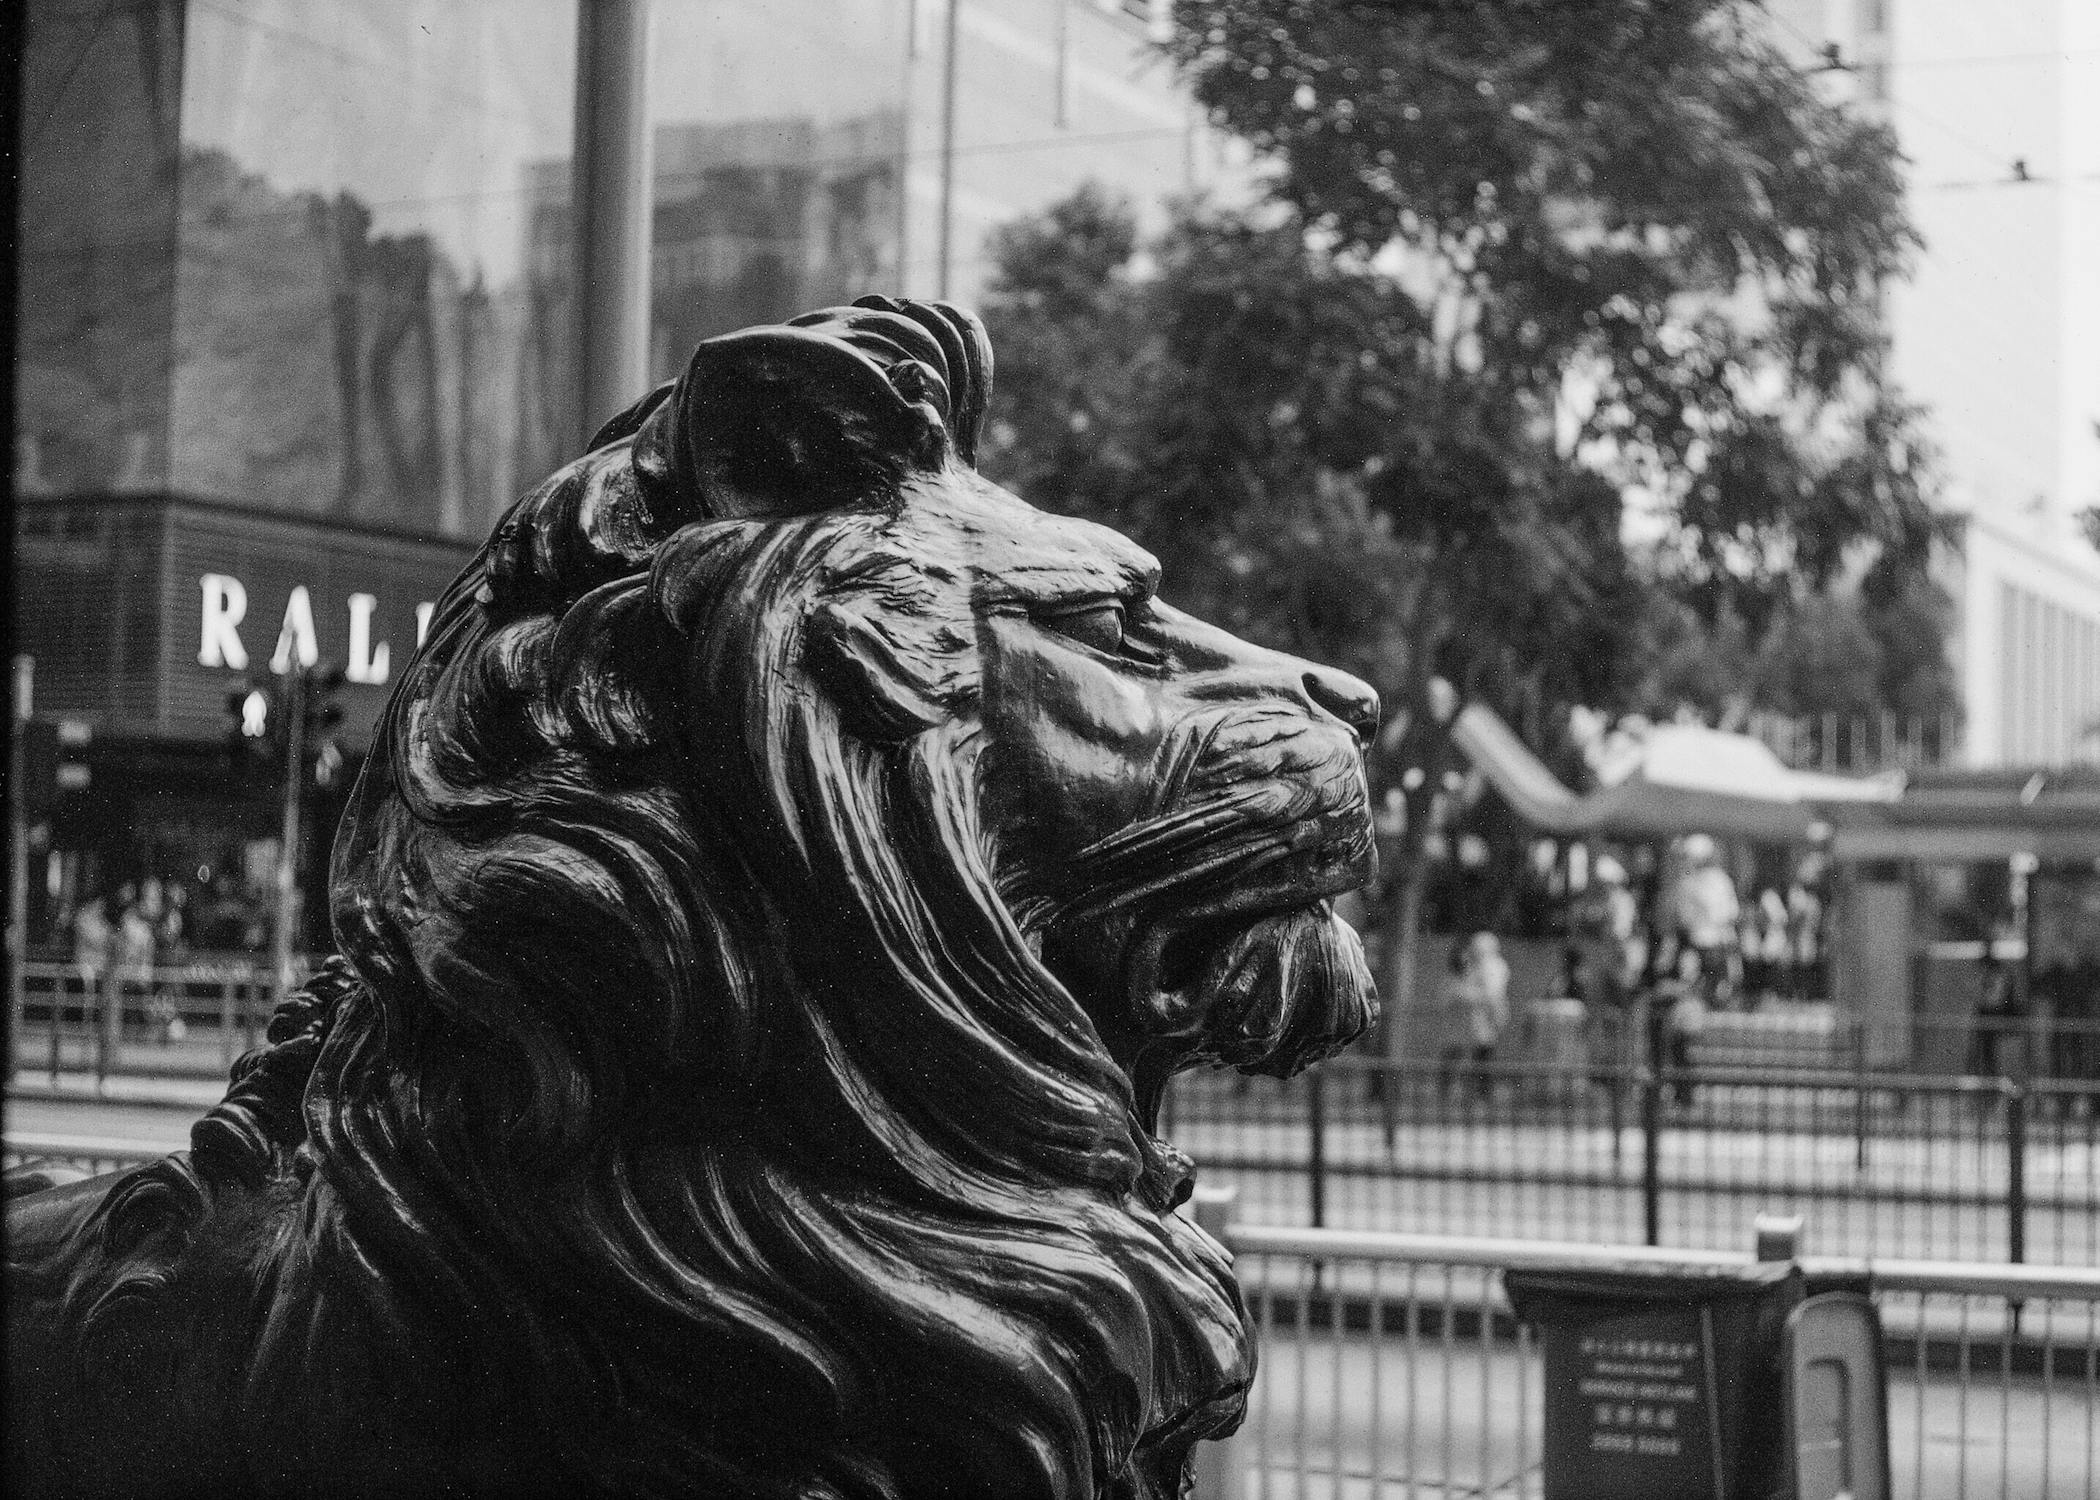 Lion Photo by Jimmy Chan from Pexels: https://www.pexels.com/photo/grayscale-photo-of-lion-statue-975437/